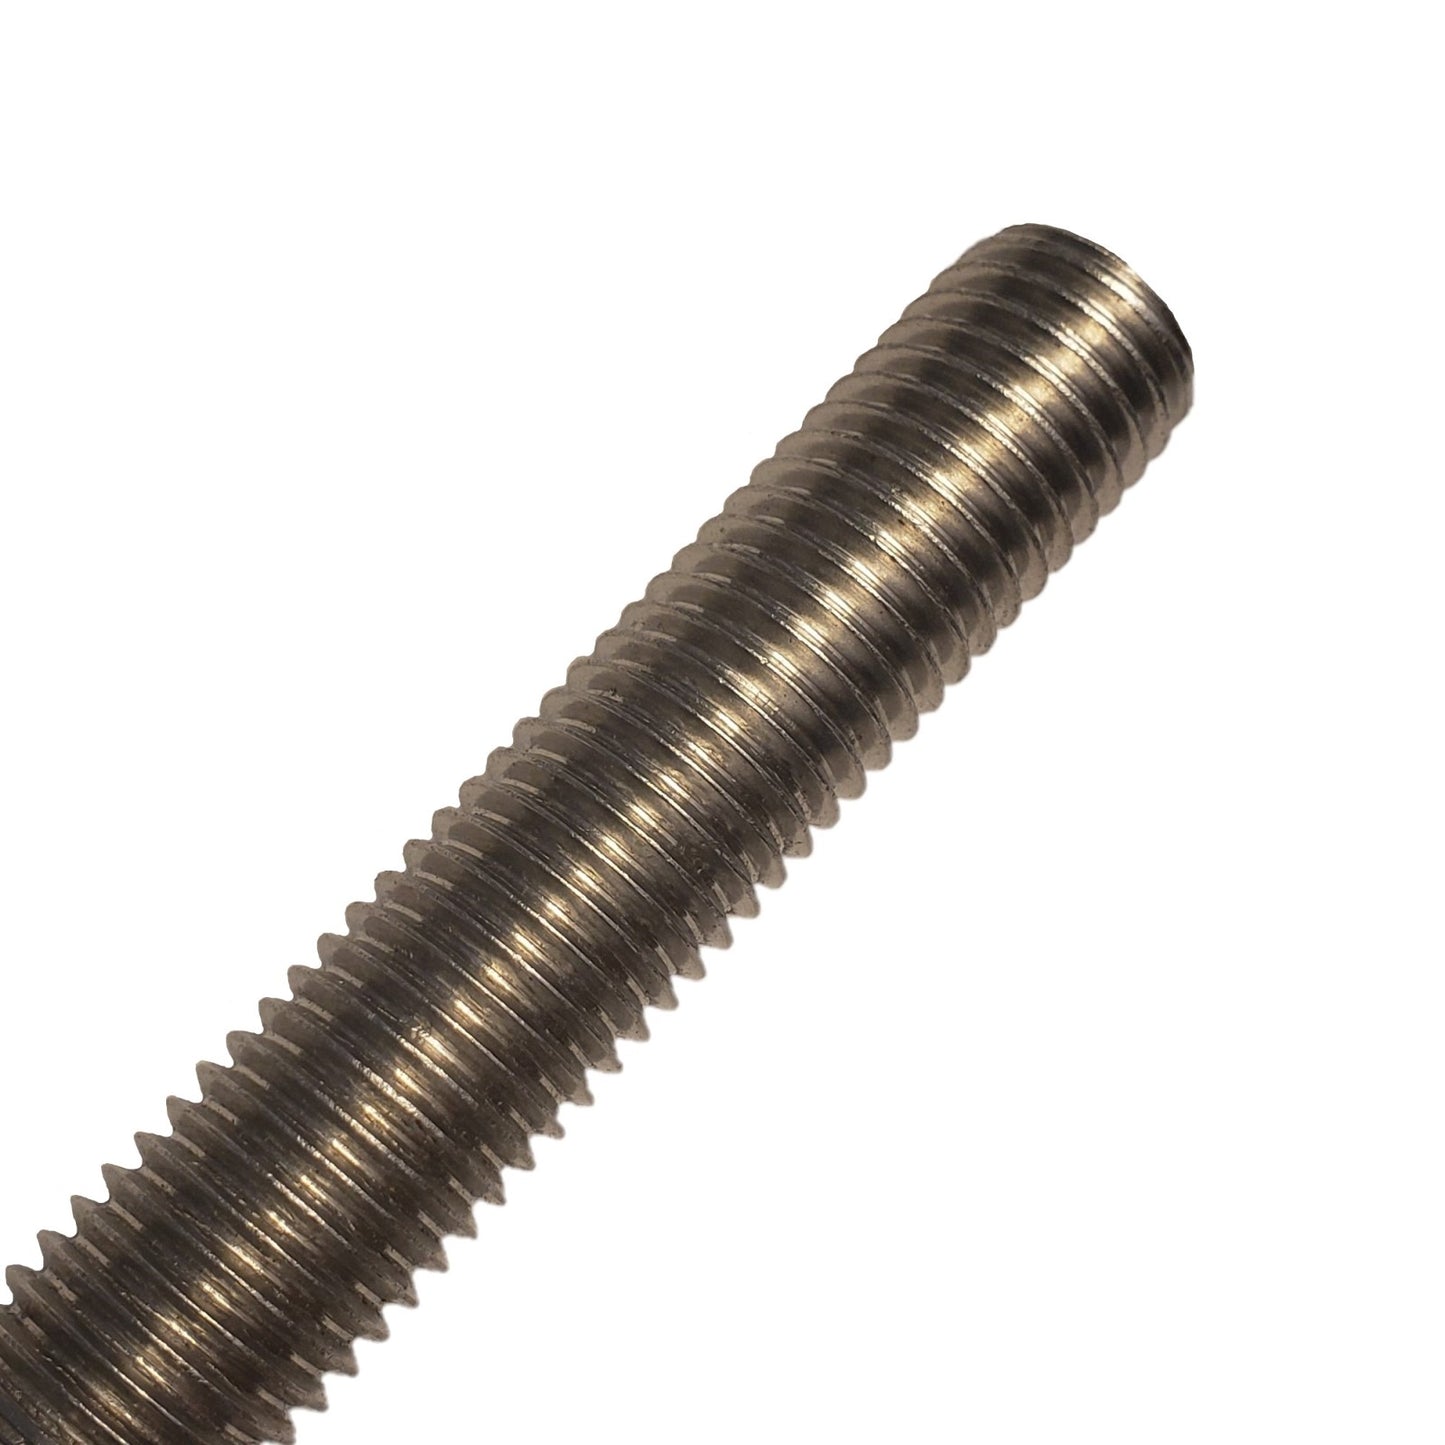 1 inch8 x 24 inch 316 Stainless Steel Threaded Rod